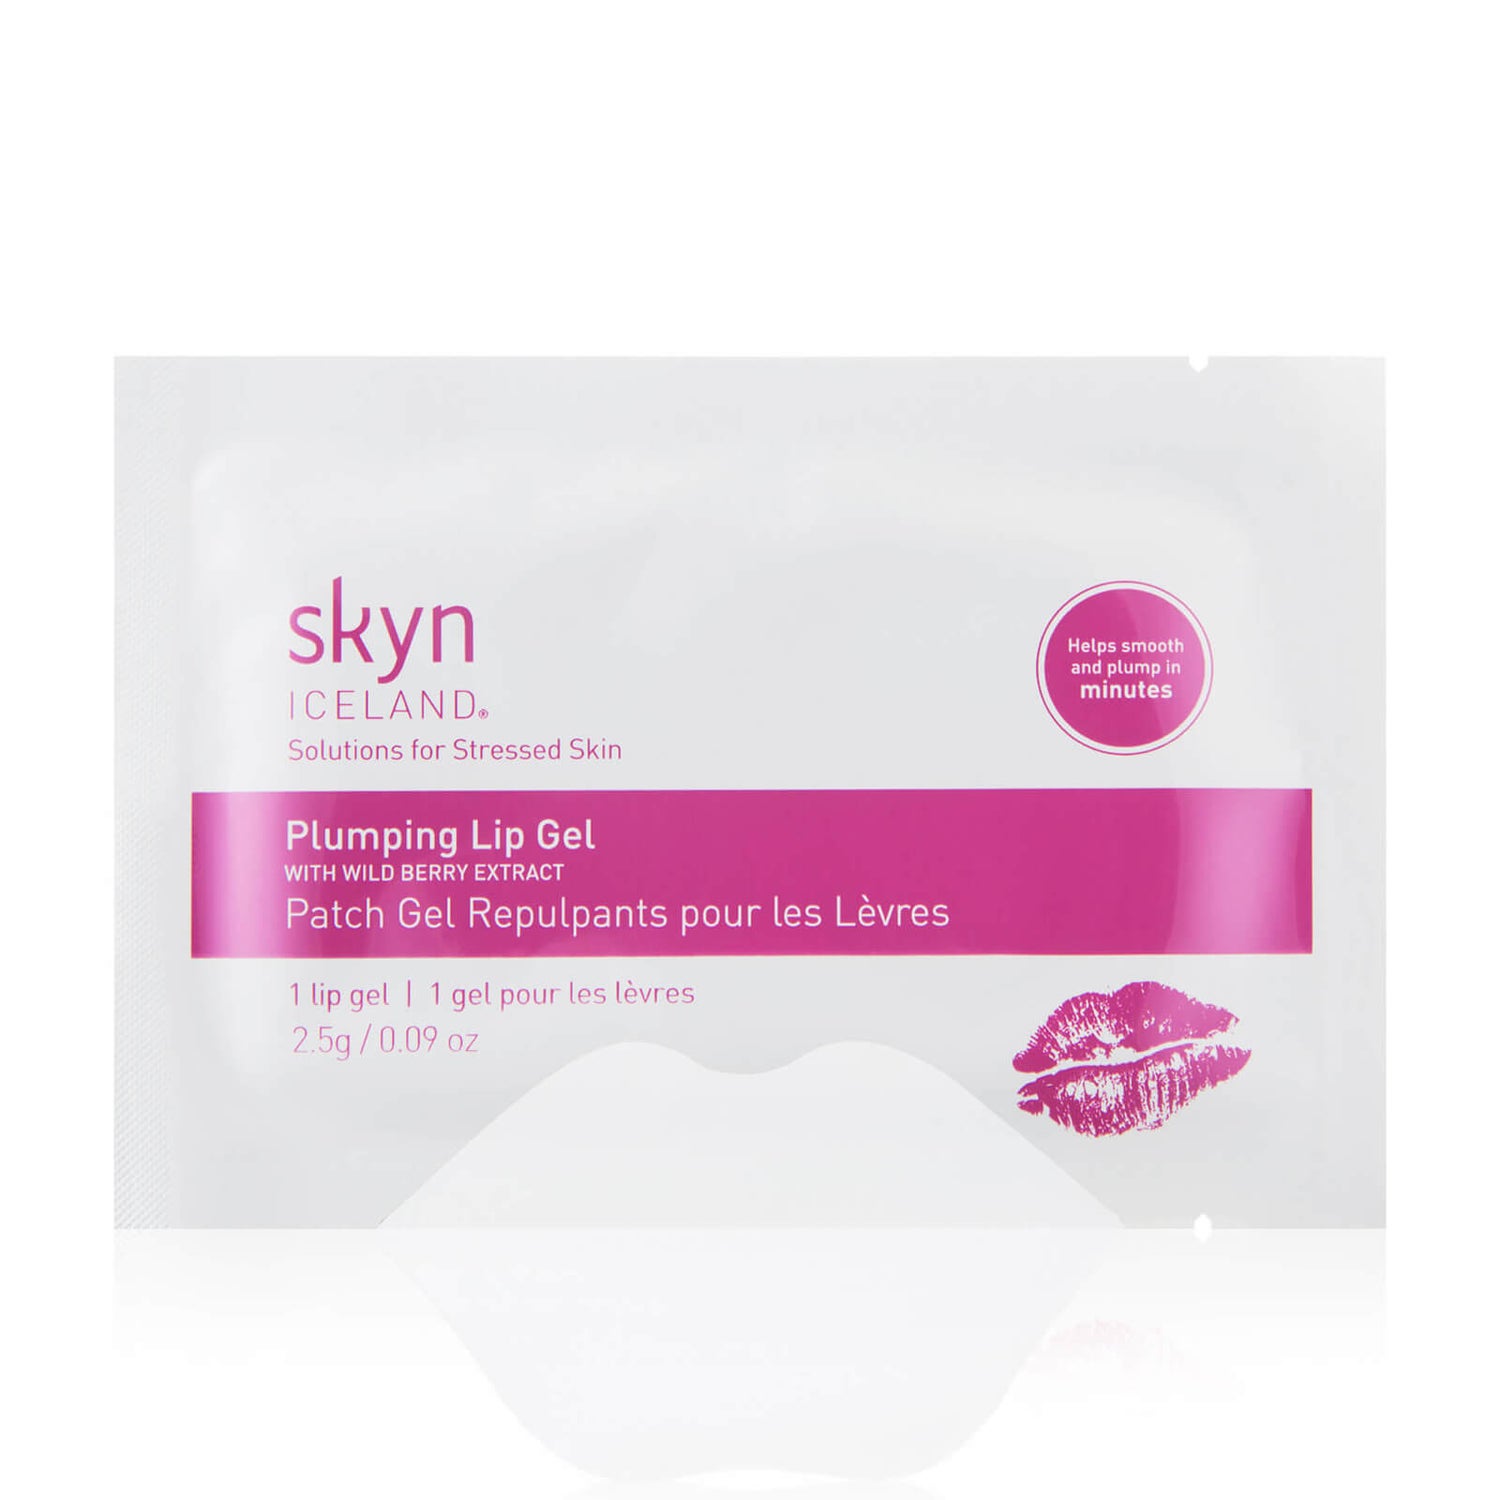 skyn ICELAND Plumping Lip Gels with Wild Berry Extract (2 count)